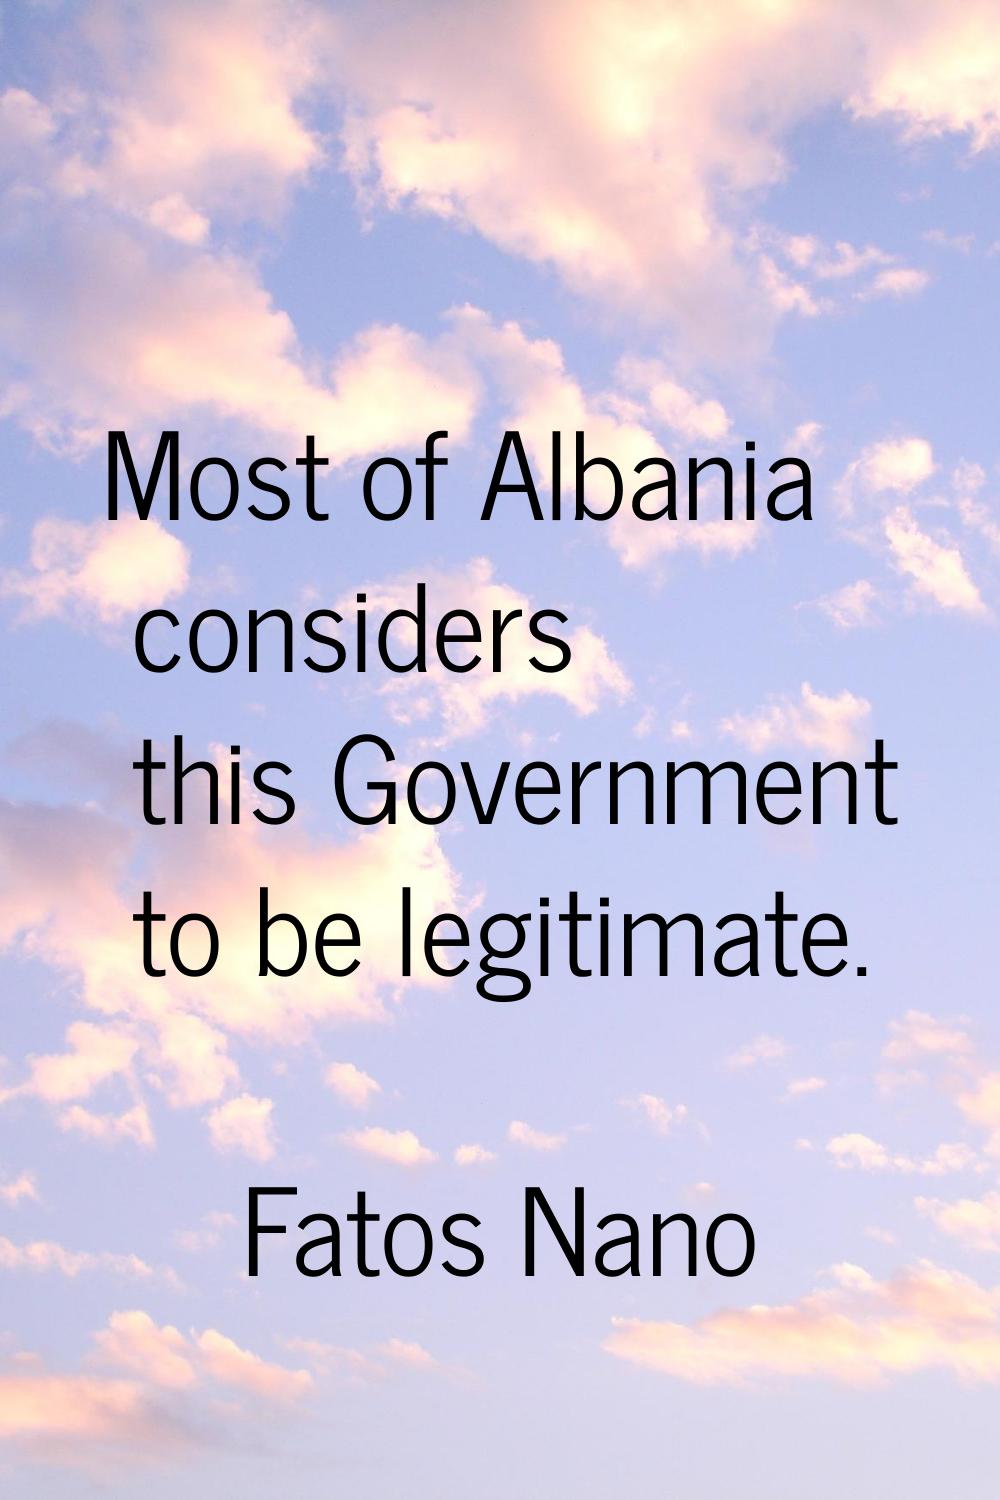 Most of Albania considers this Government to be legitimate.